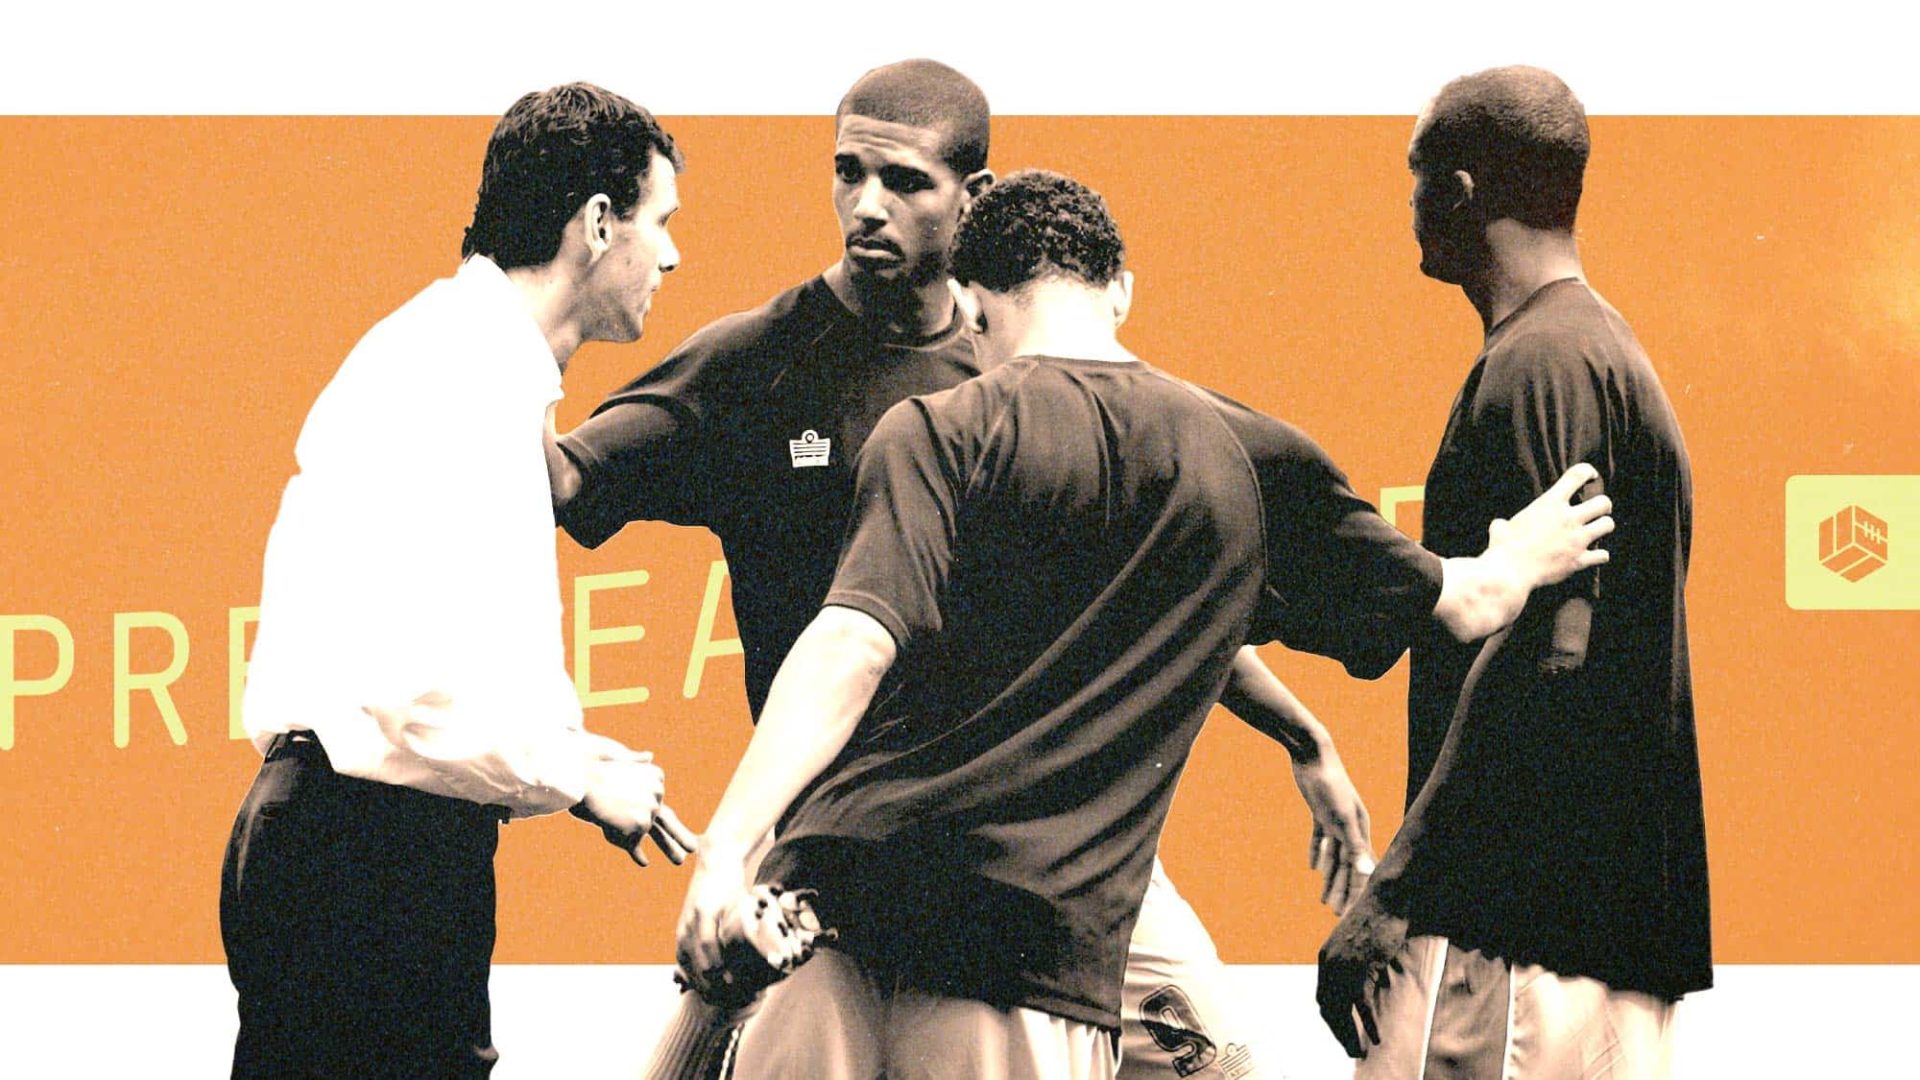 Jermaine Beckford and the class of 2007 debating things with Gus Poyet